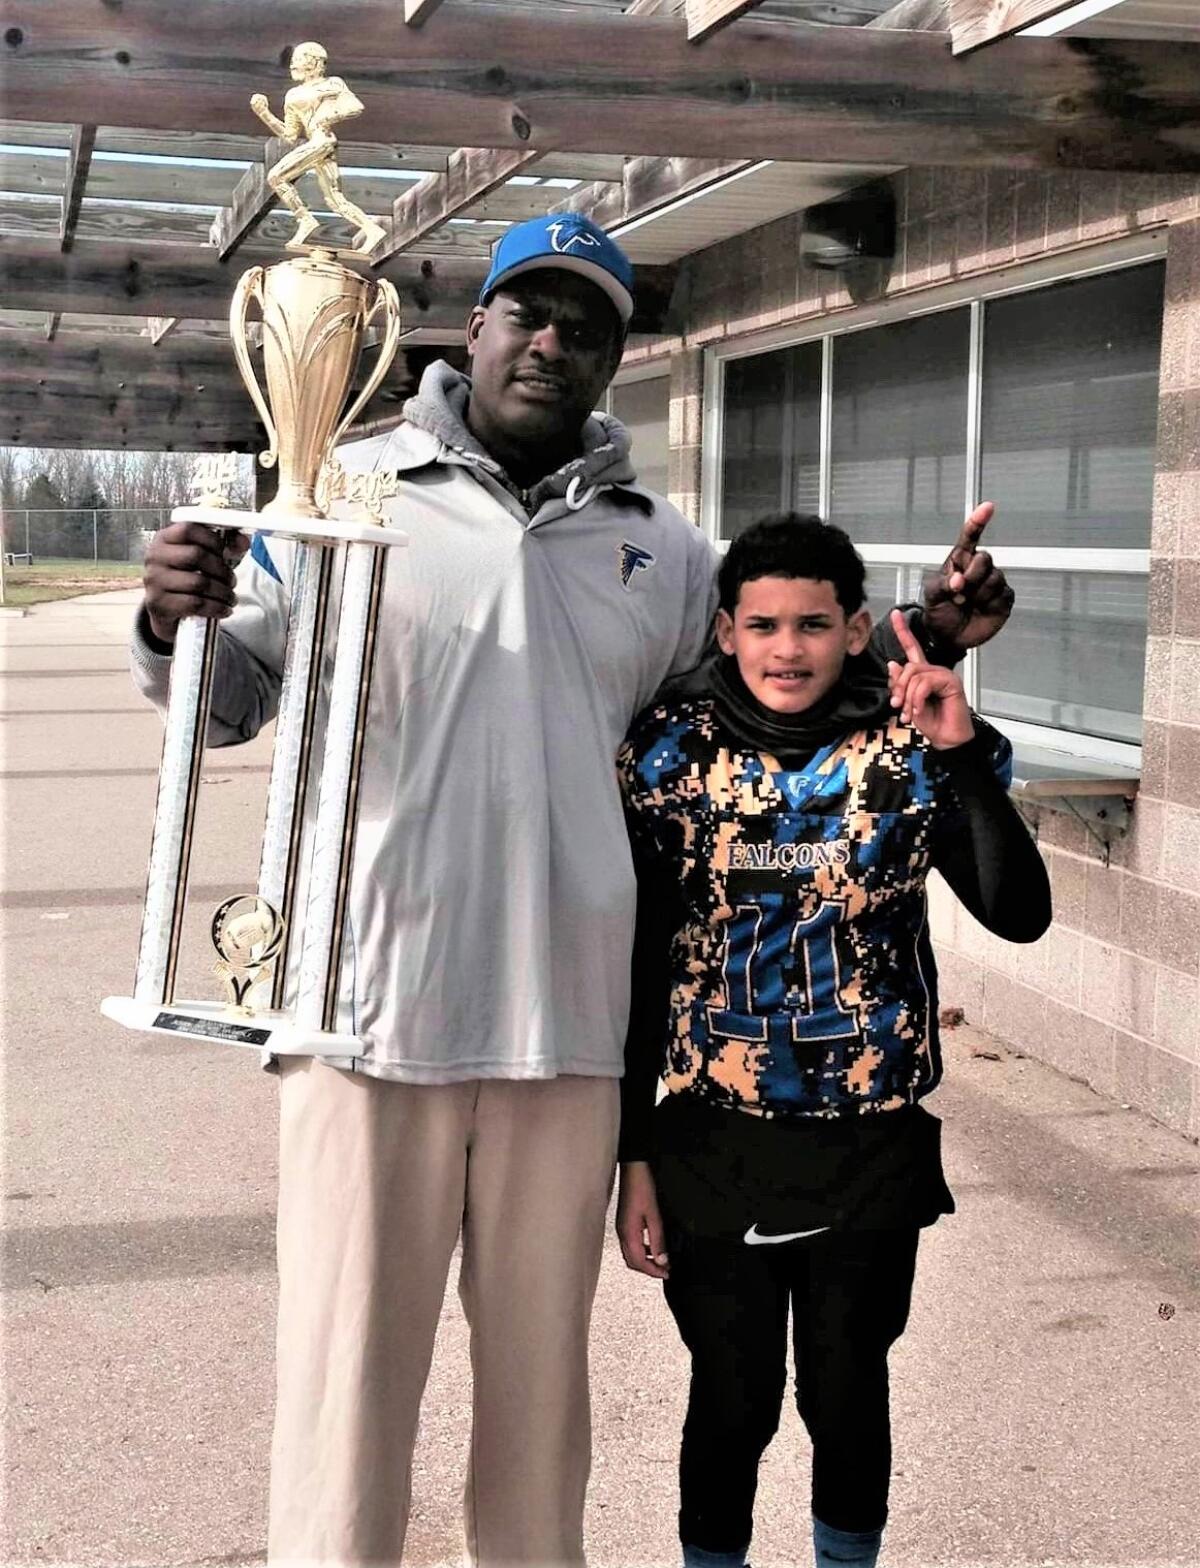 Otha Moore Sr. and Dante Moore pose while holding up a youth state championship trophy Dante's team won.